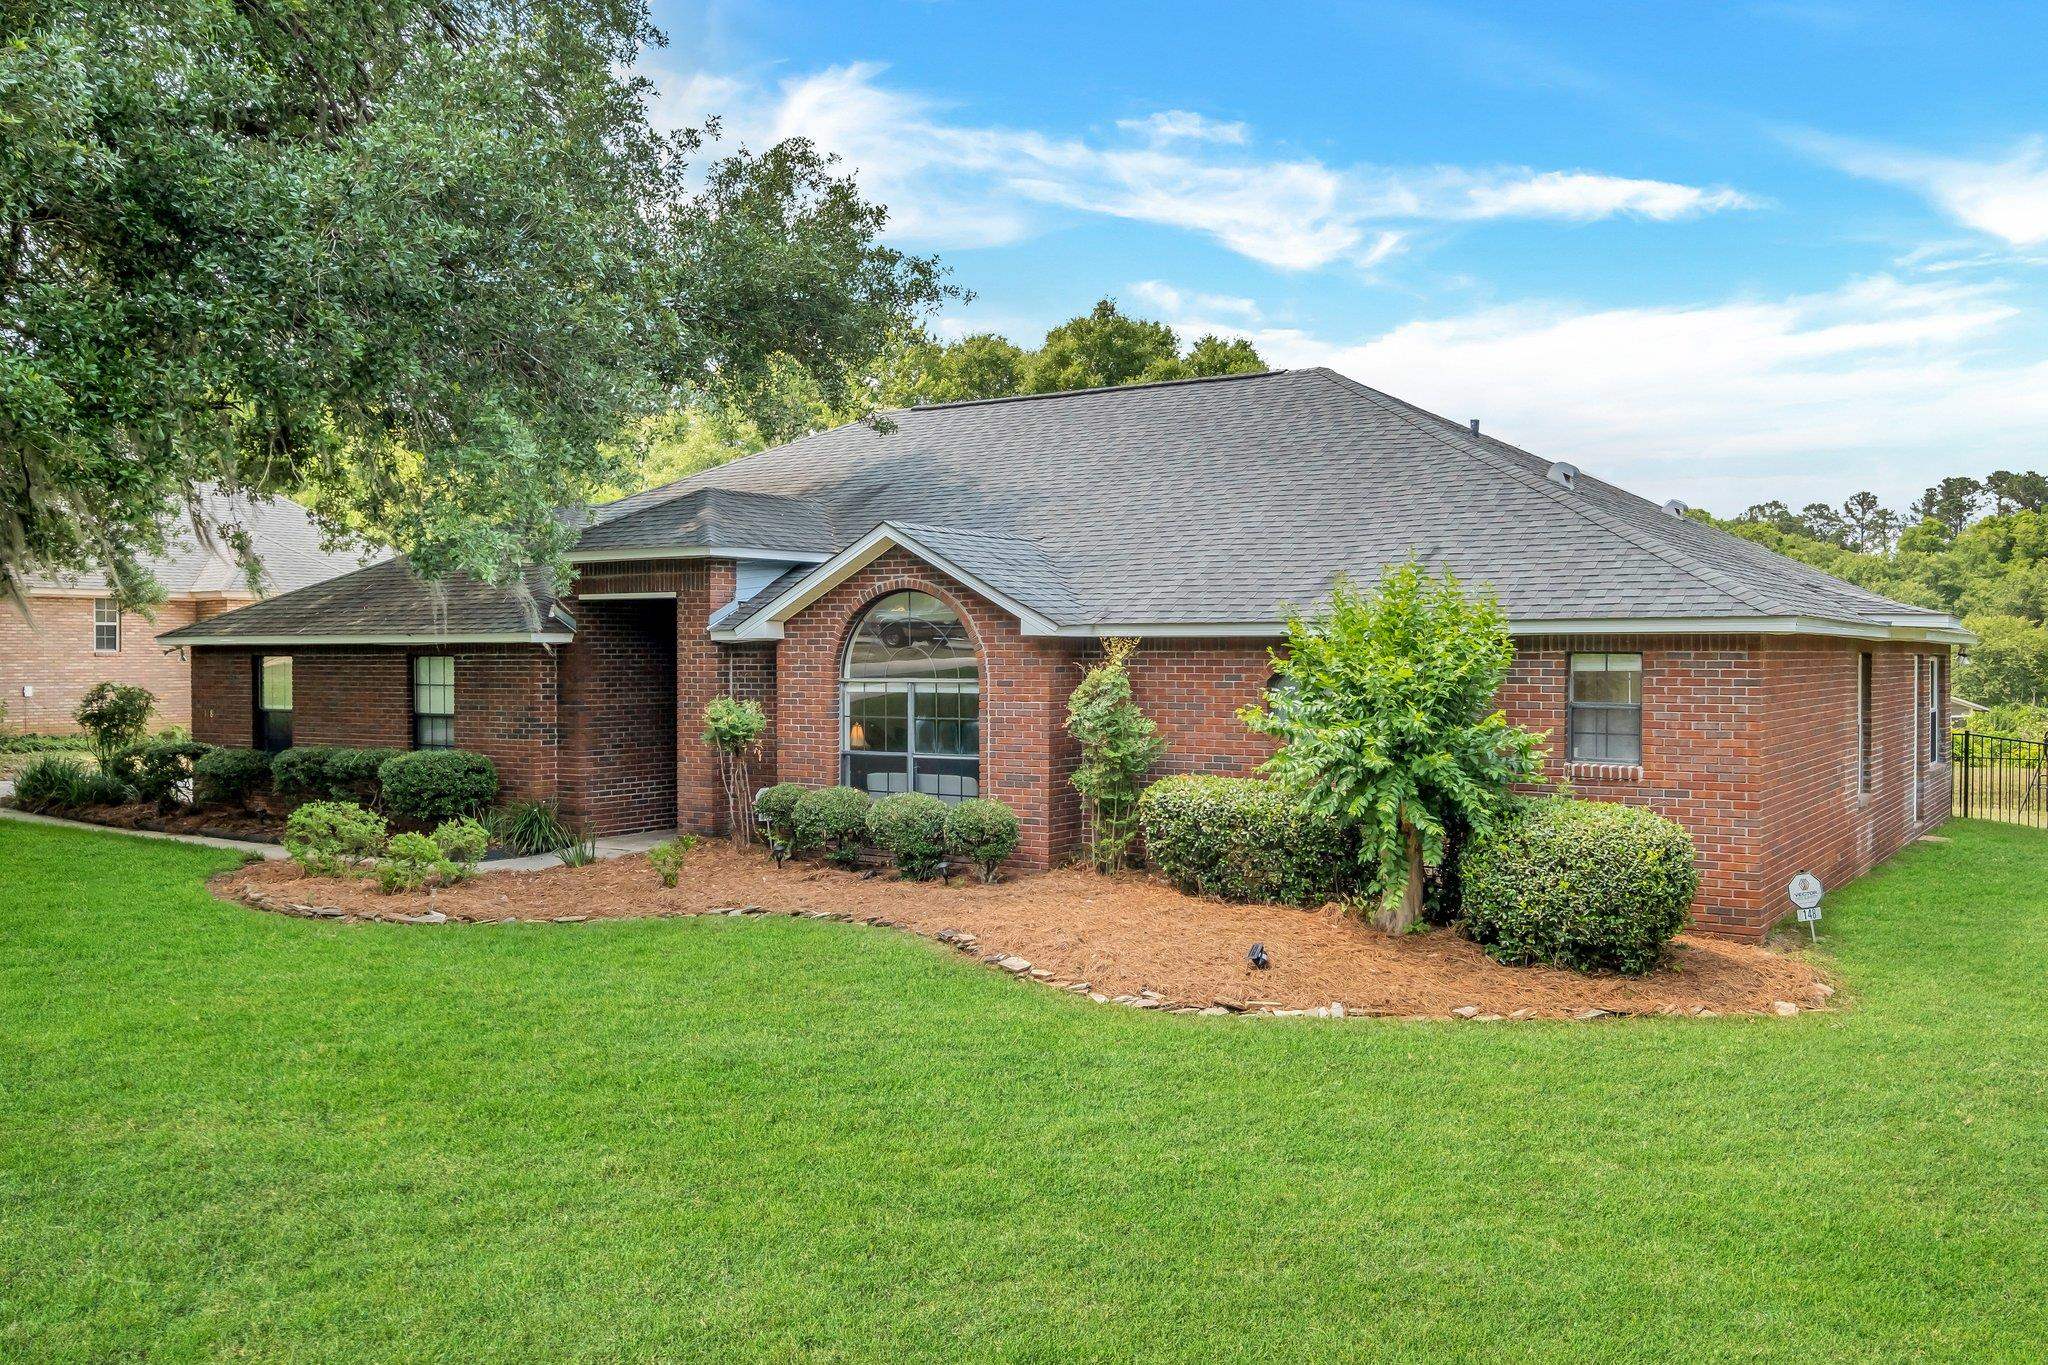 Property: 148 Thistlewood Court,Tallahassee, FL